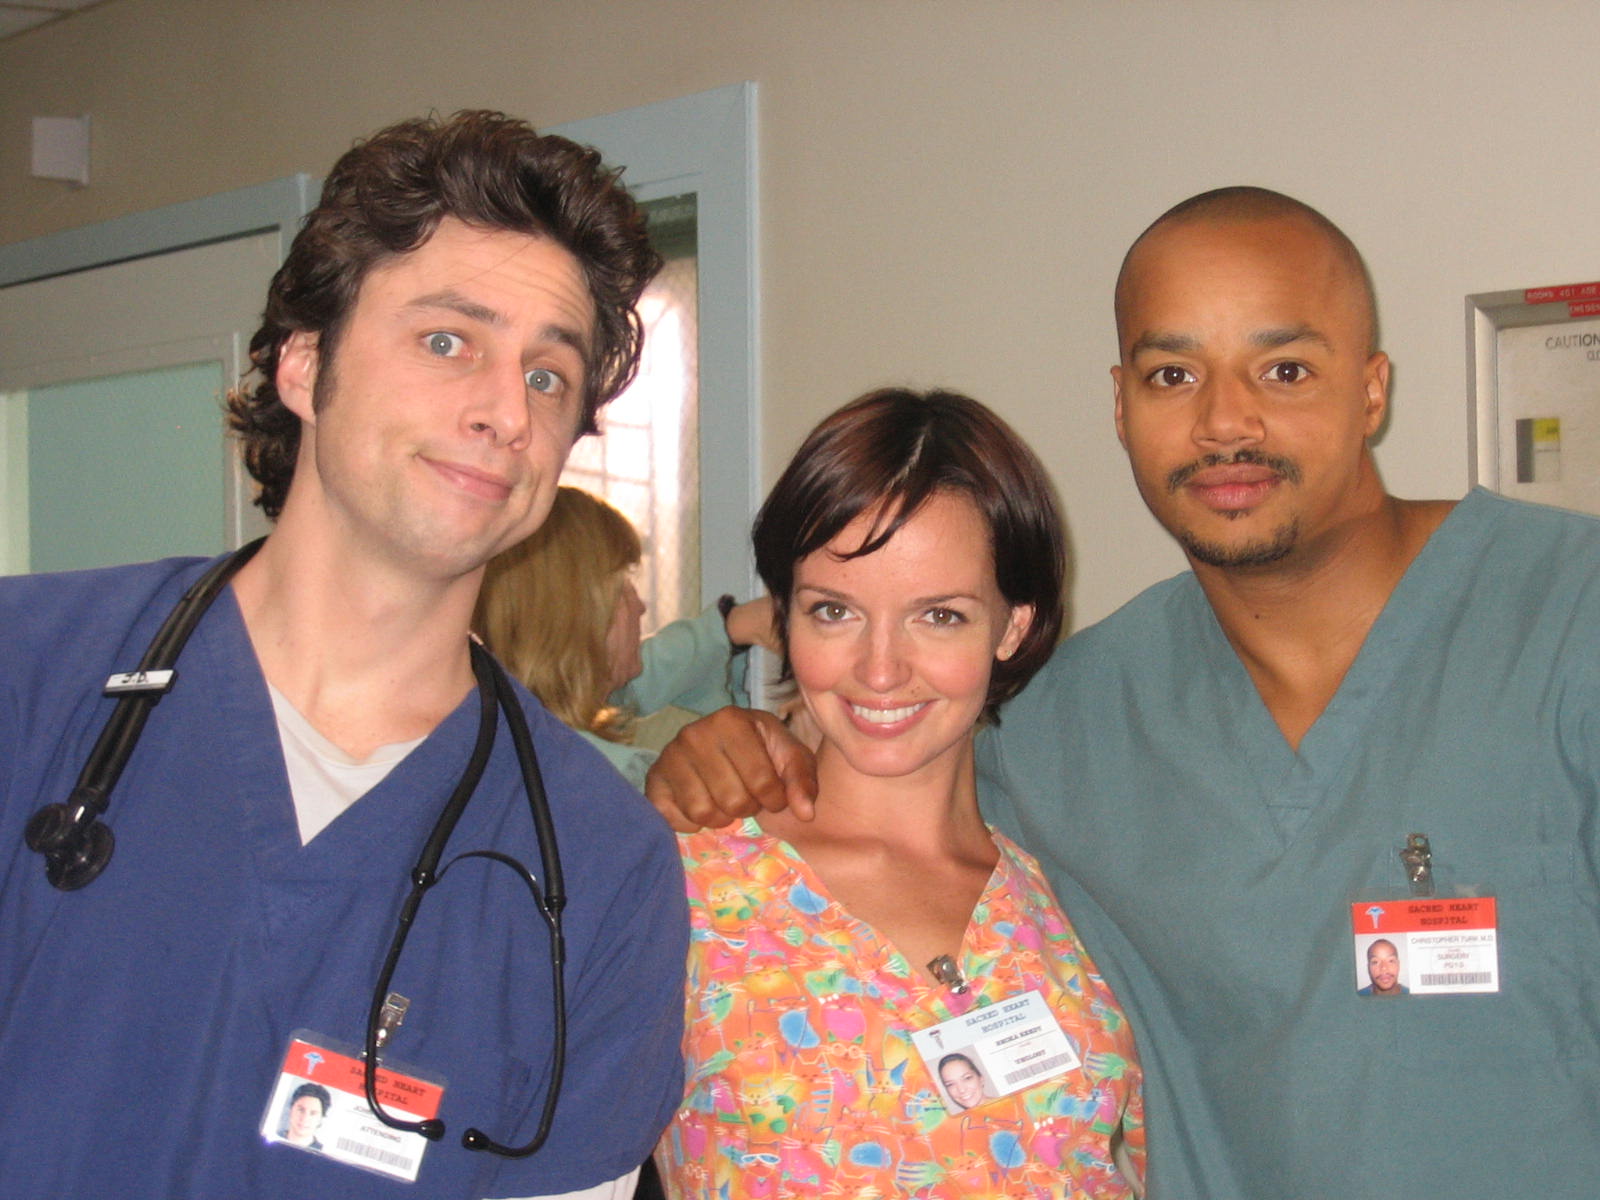 SCRUBS with Zack Braff and Donald Faison